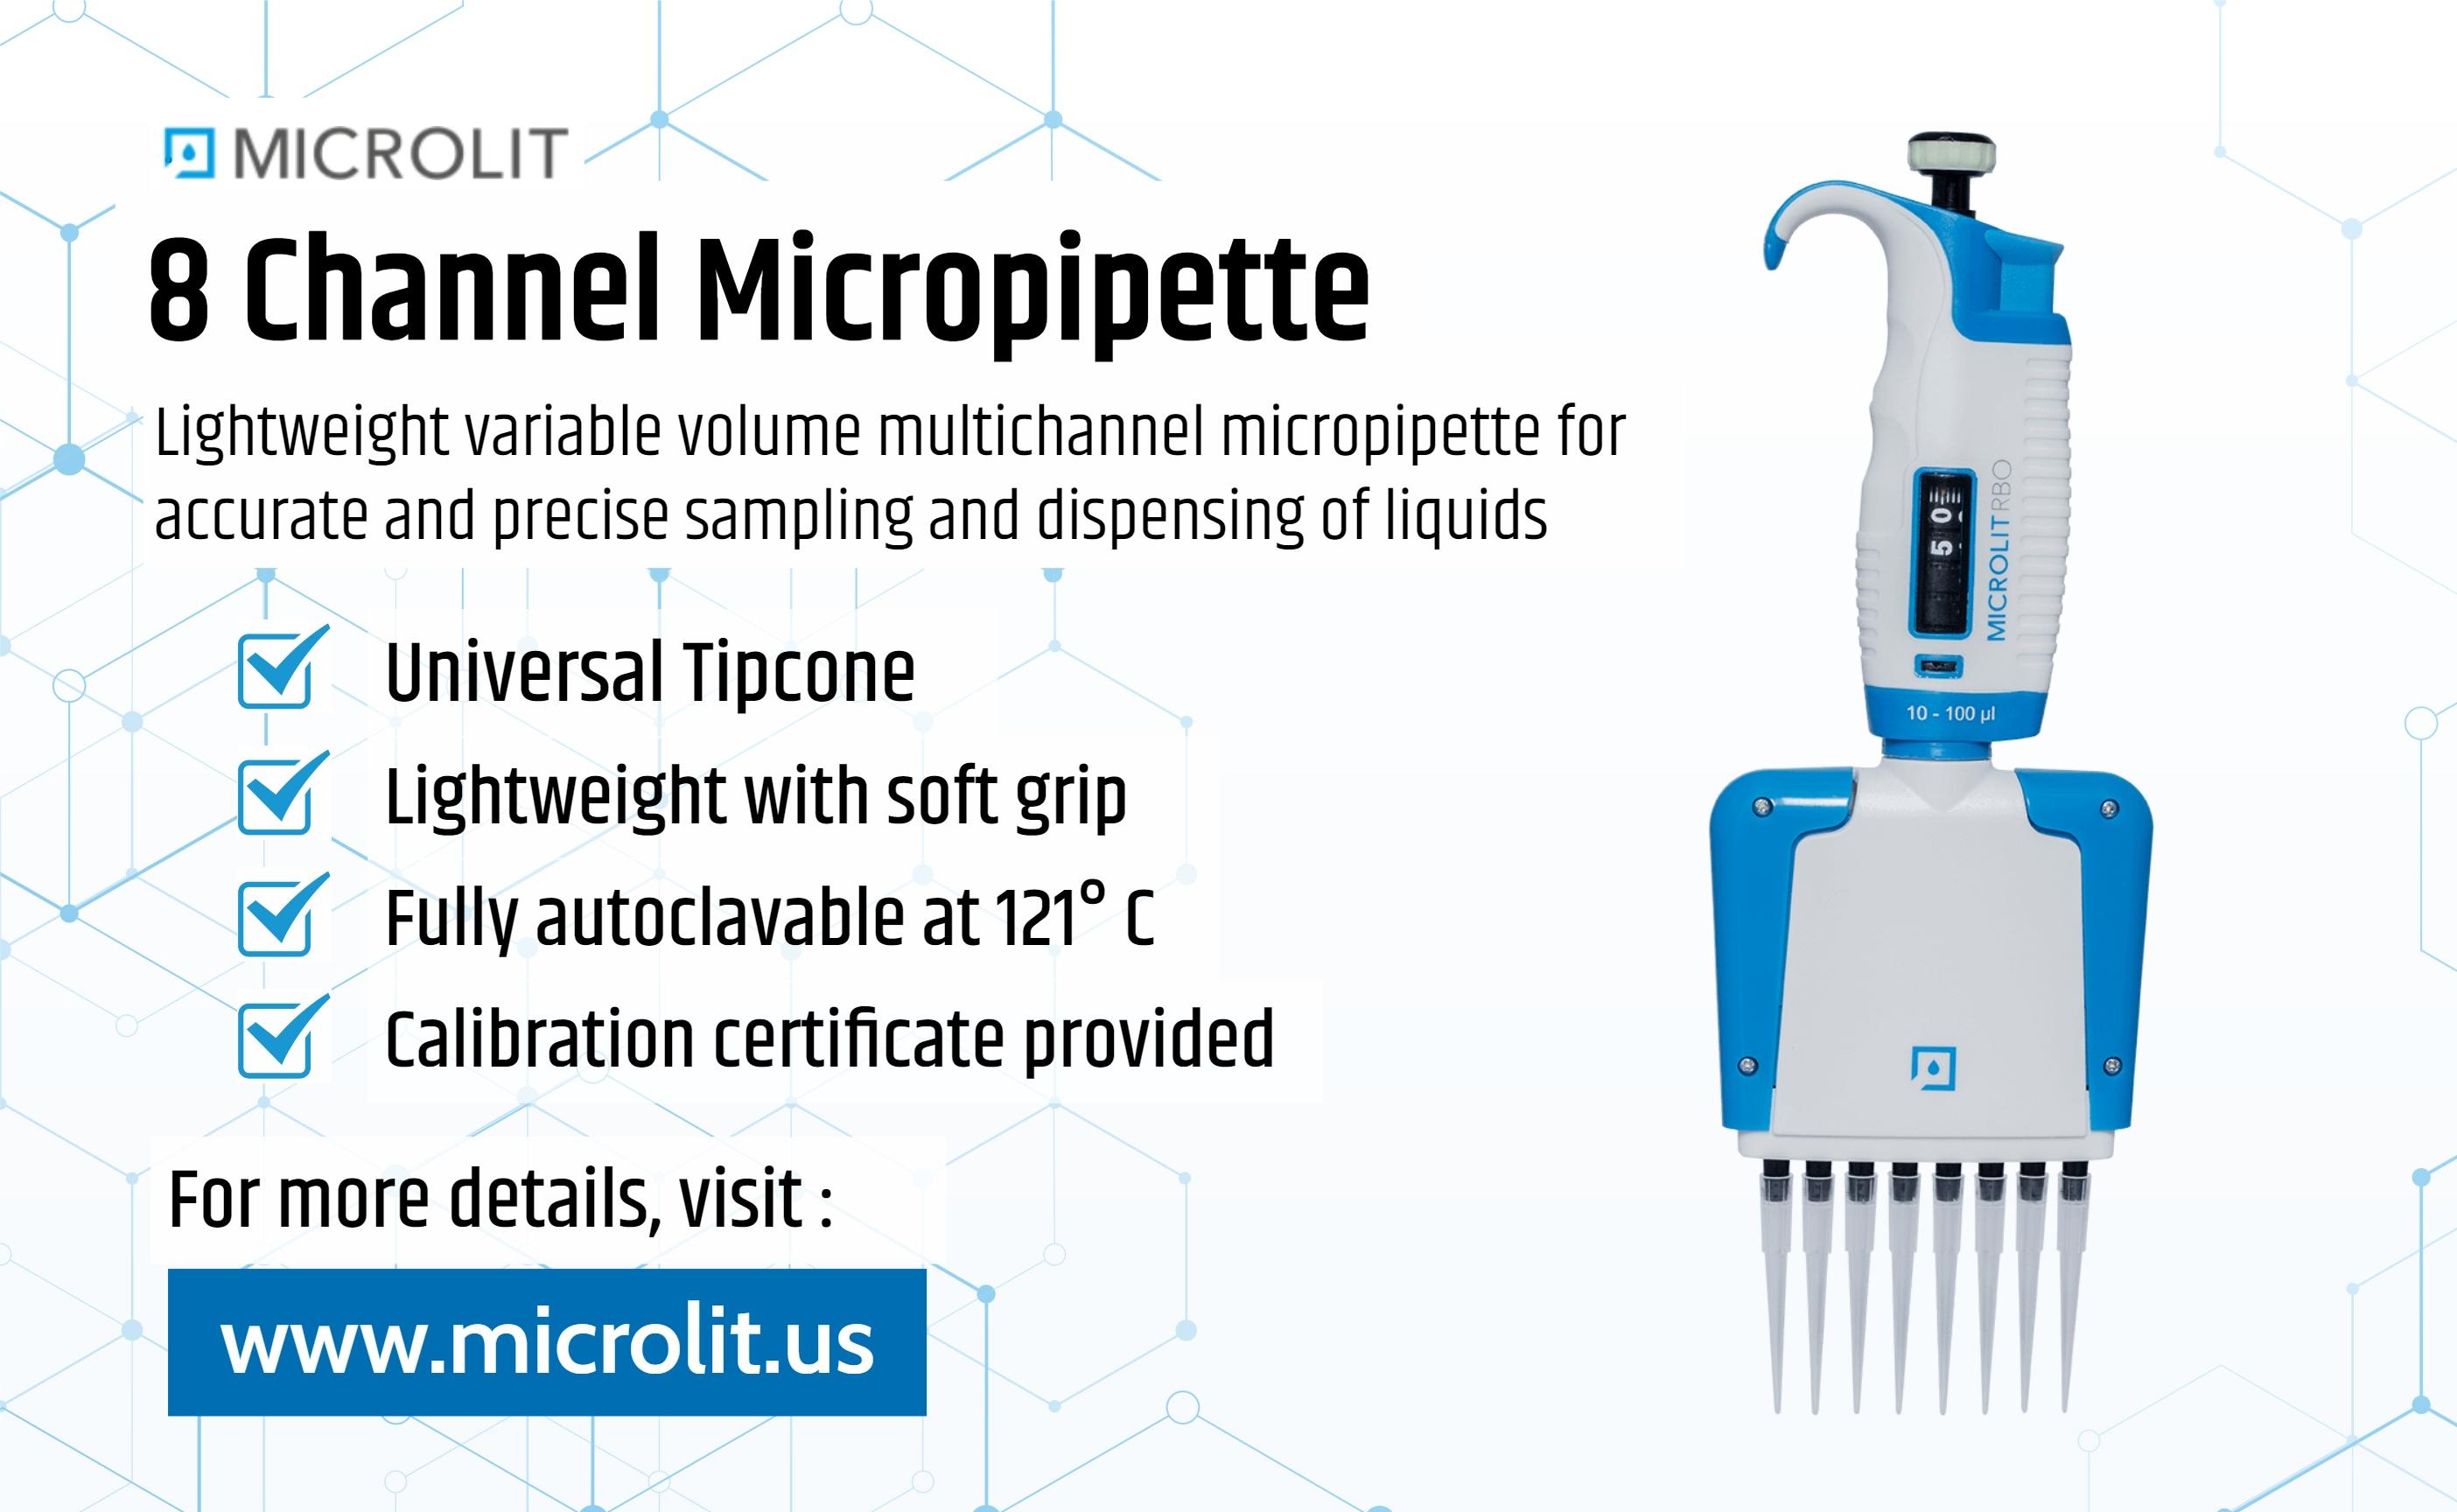 Image - Microlit offers the 8 Channel #Micropipette that is lightweight variable volume #MultichannelMicropipette for...